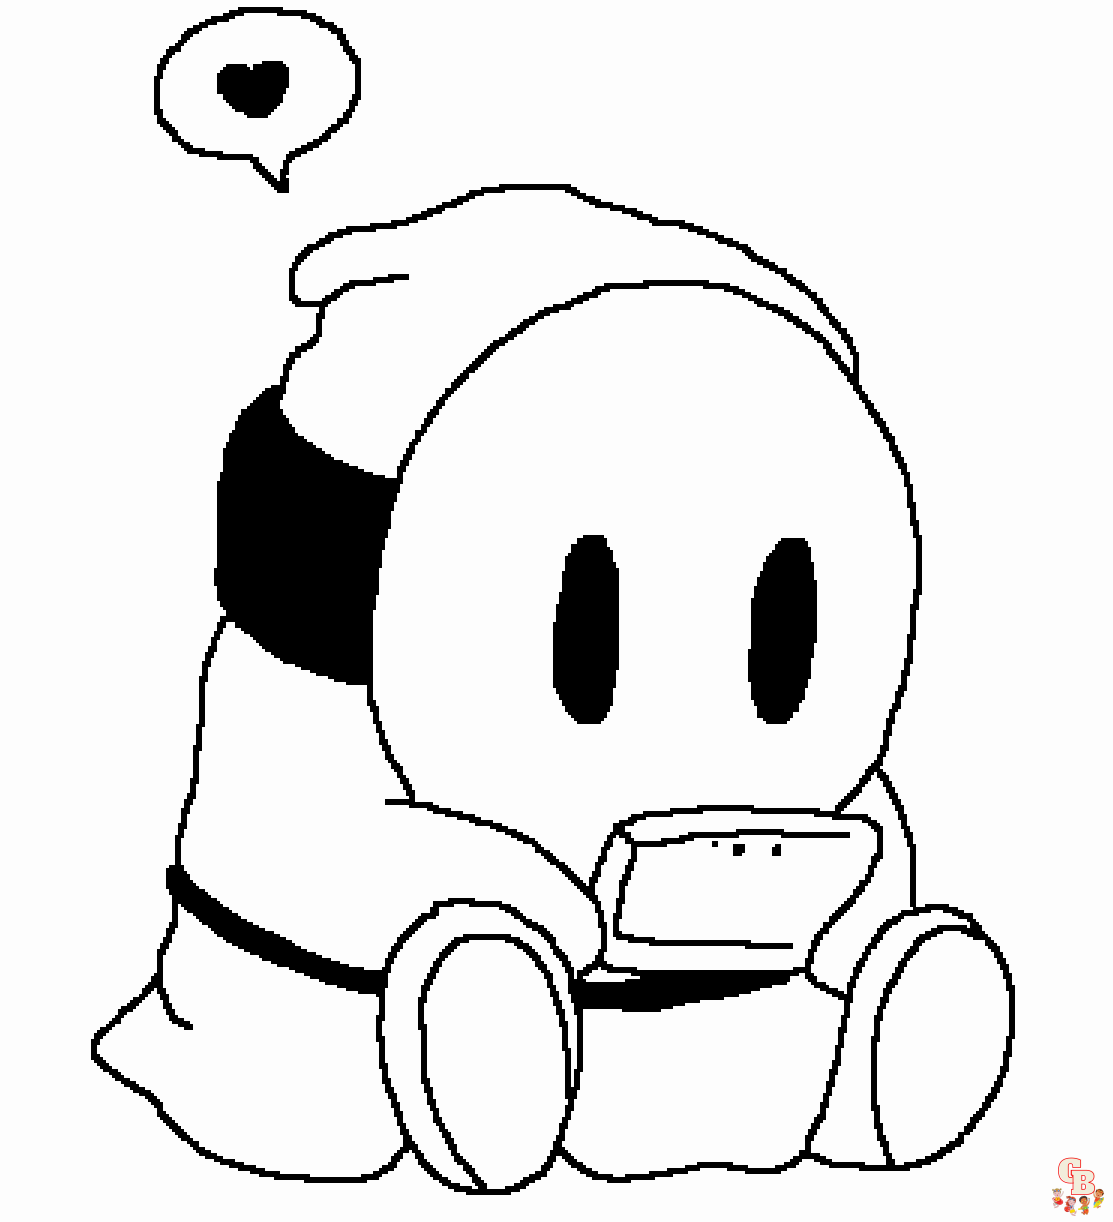 Printable shy guy coloring pages free for kids and adults